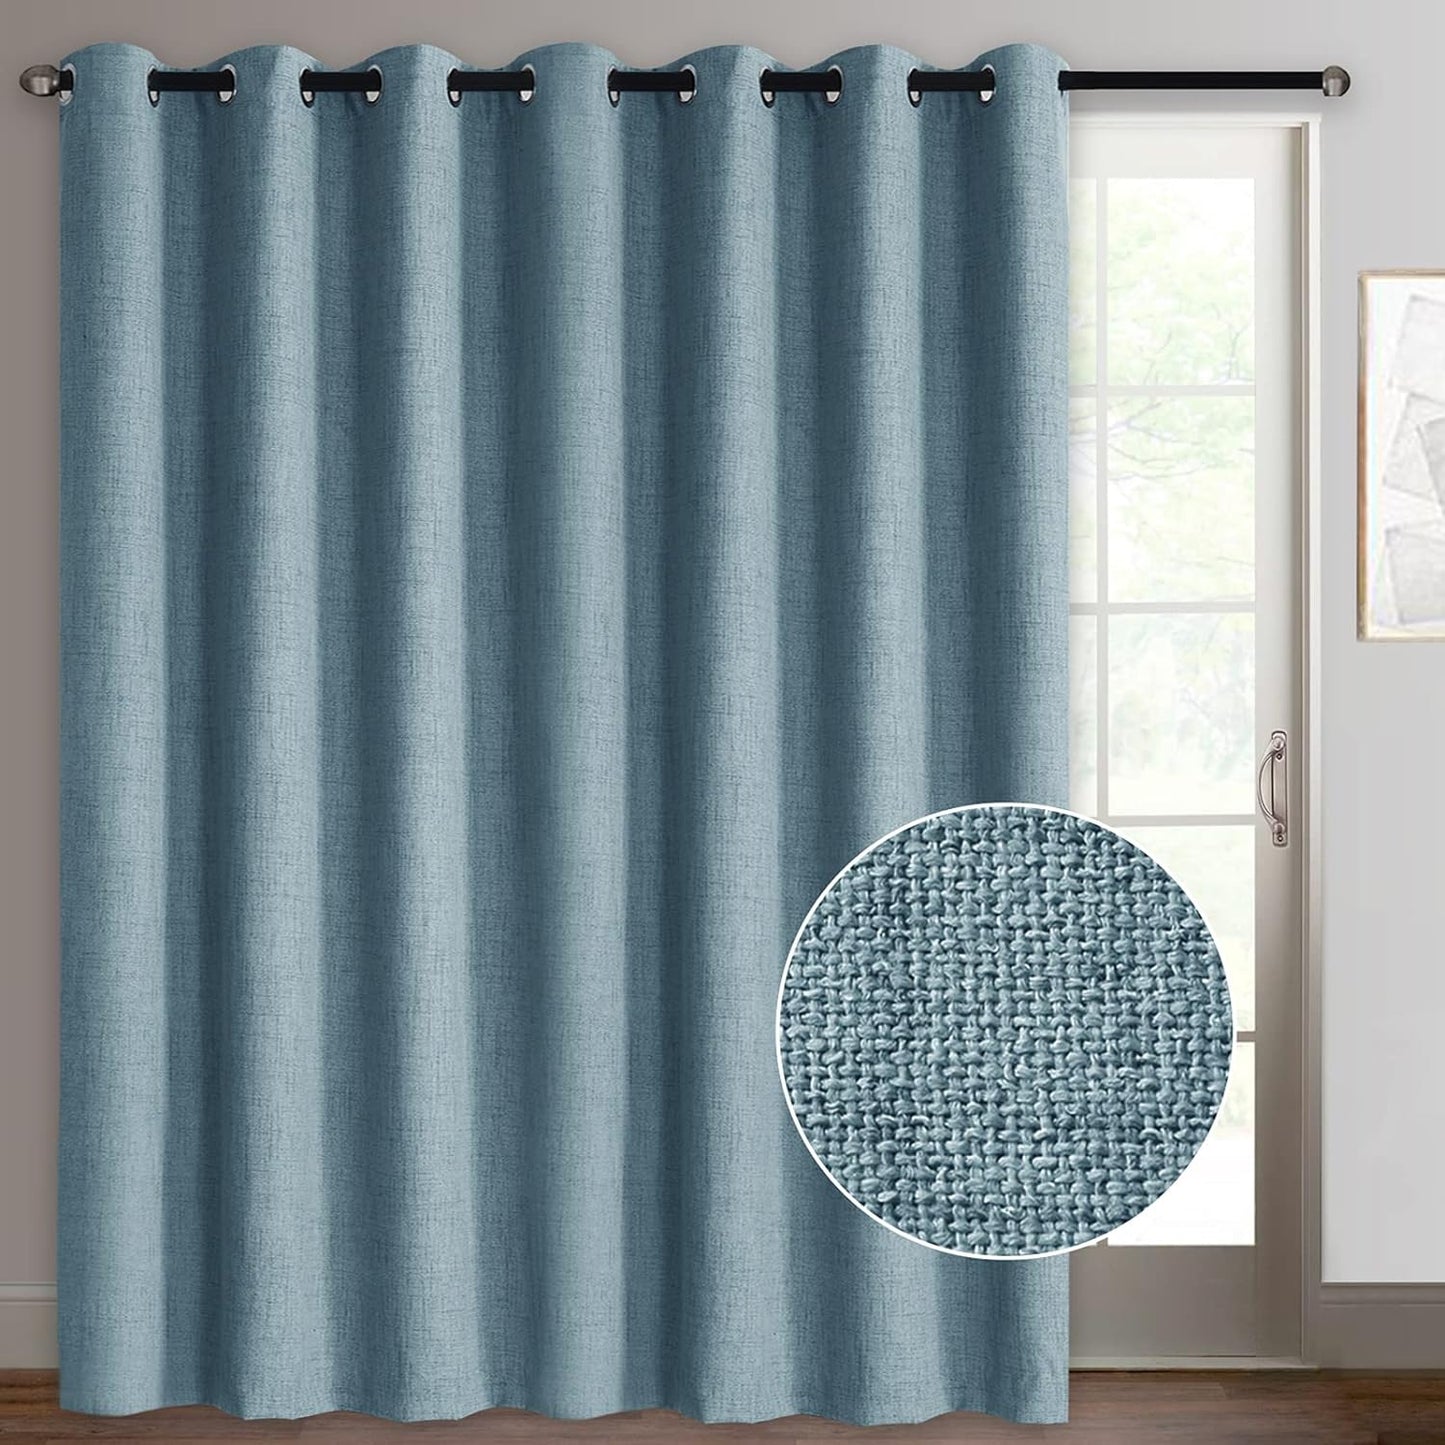 Rose Home Fashion Sliding Door Curtains, Primitive Linen Look 100% Blackout Curtains, Thermal Insulated Patio Door Curtains-1 Panel (W100 X L84, Grey)  Rose Home Fashion Blue W100 X L96|1 Panel 